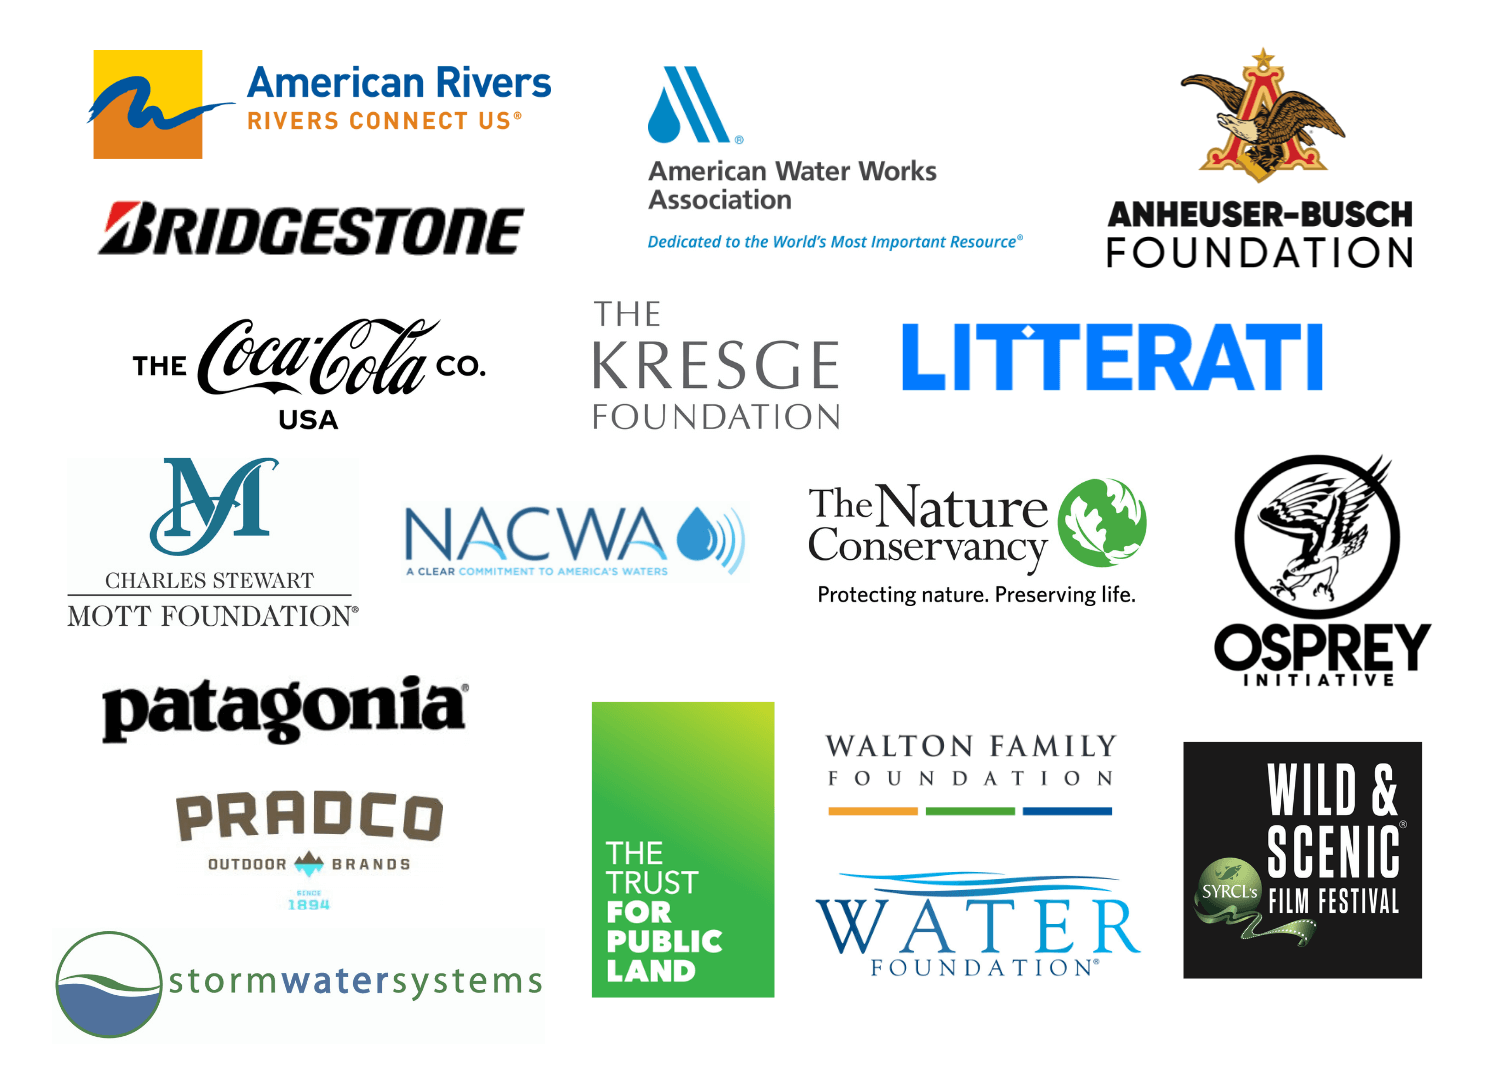 Collabe image of company logos including American Rivers, American Water Works Association, Anheuser-Busch Foundation, Bridgestone, The Coca-Cola Co., The Kresge Foundation, LItterati, Mott Foundation, NACWA, The Nature Conservancy, Osprey Initiative, Patagonia, Pradco, The Trust for Public Land, Walton Family Foundation, Water Foundation, Wild & Scenic Film Festival.